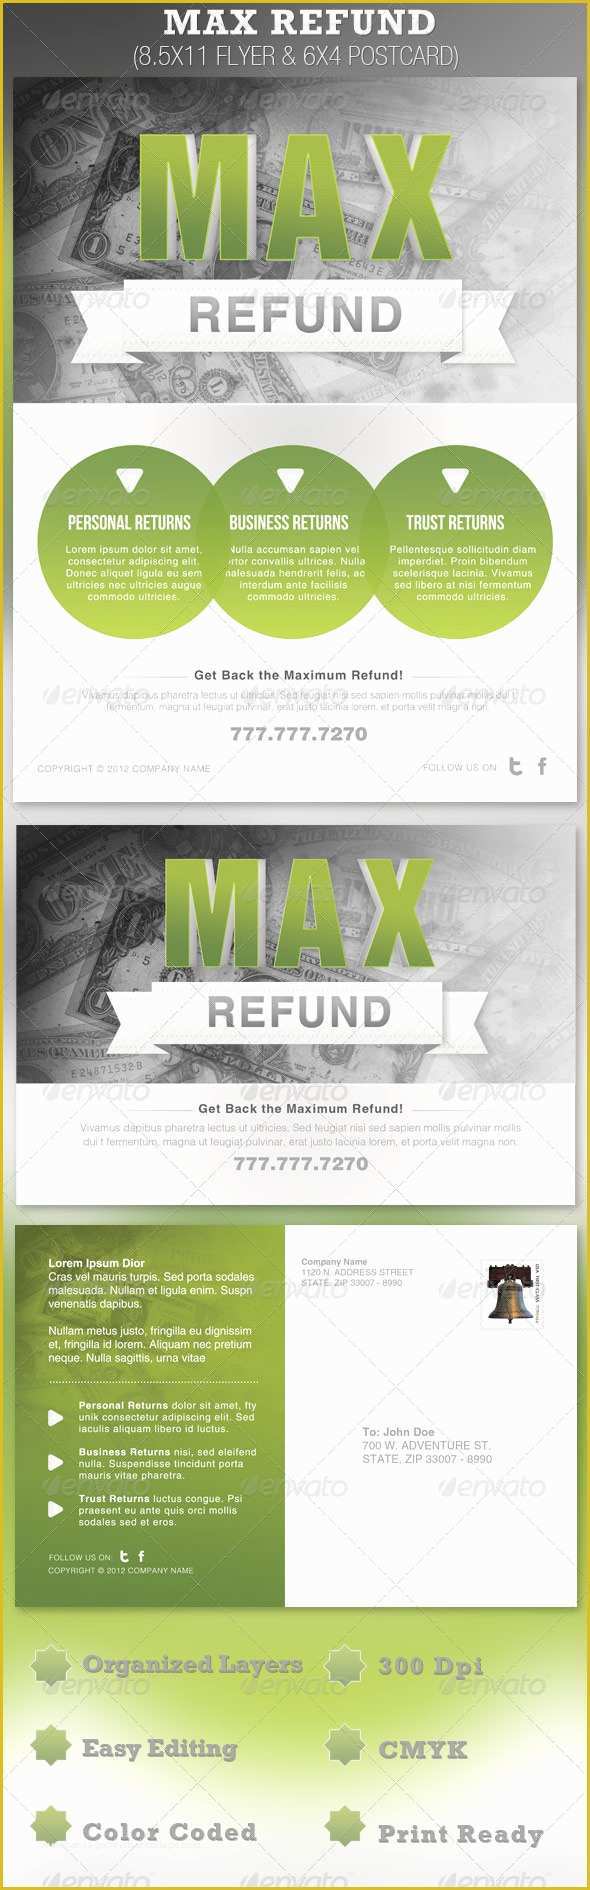 Tax Flyer Templates Free Of Tax Preparation Flyers Templates Maydesk